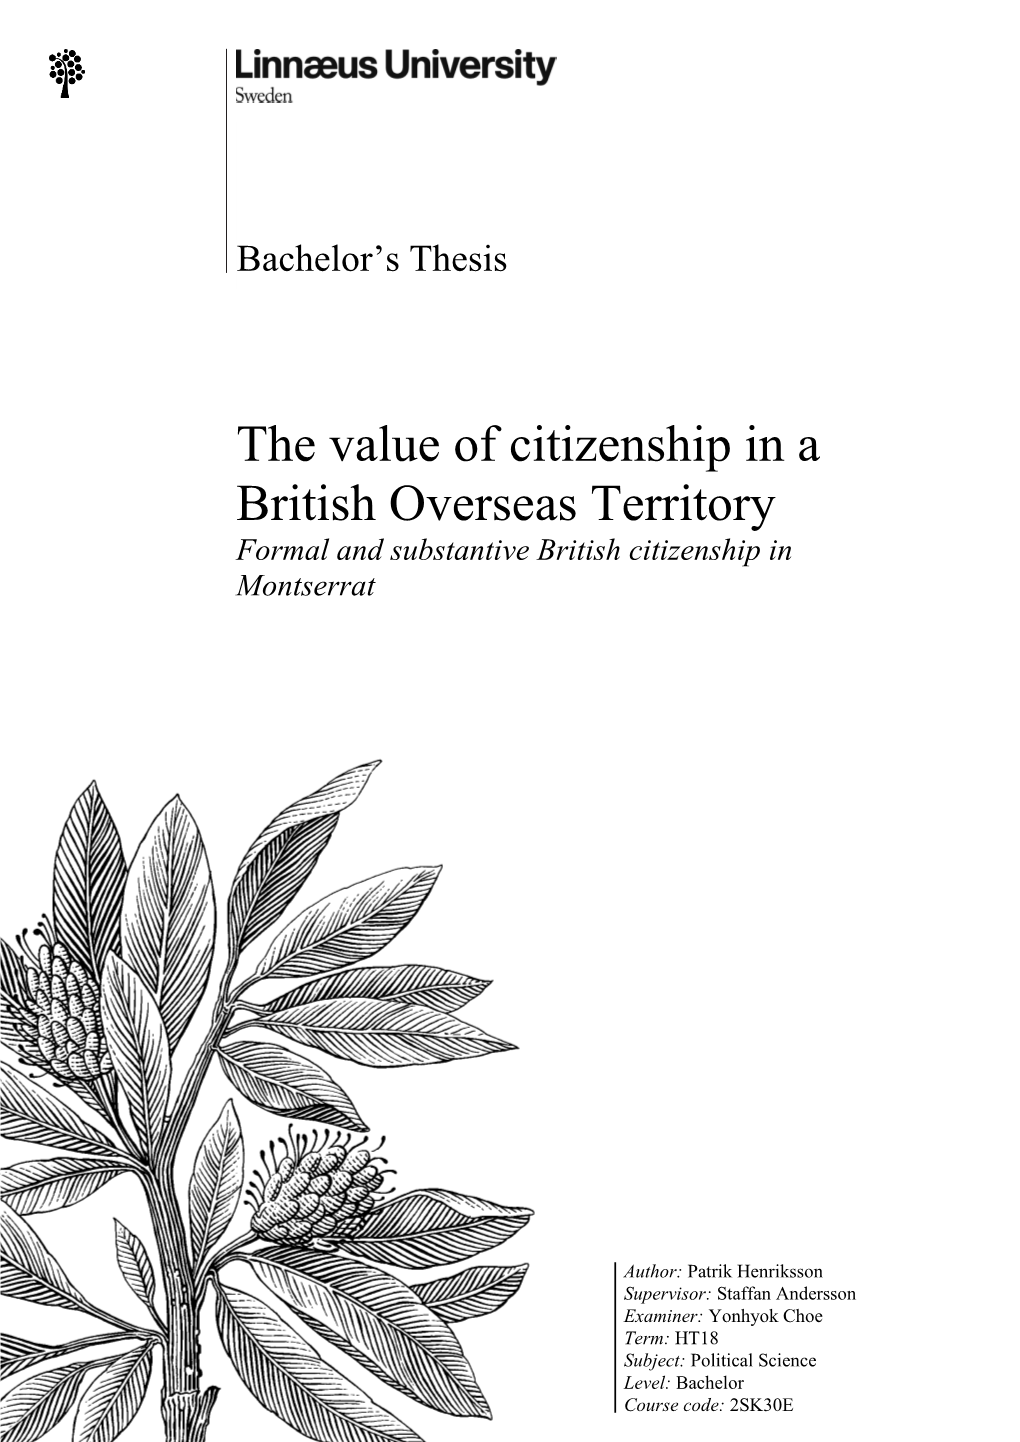 The Value of Citizenship in a British Overseas Territory